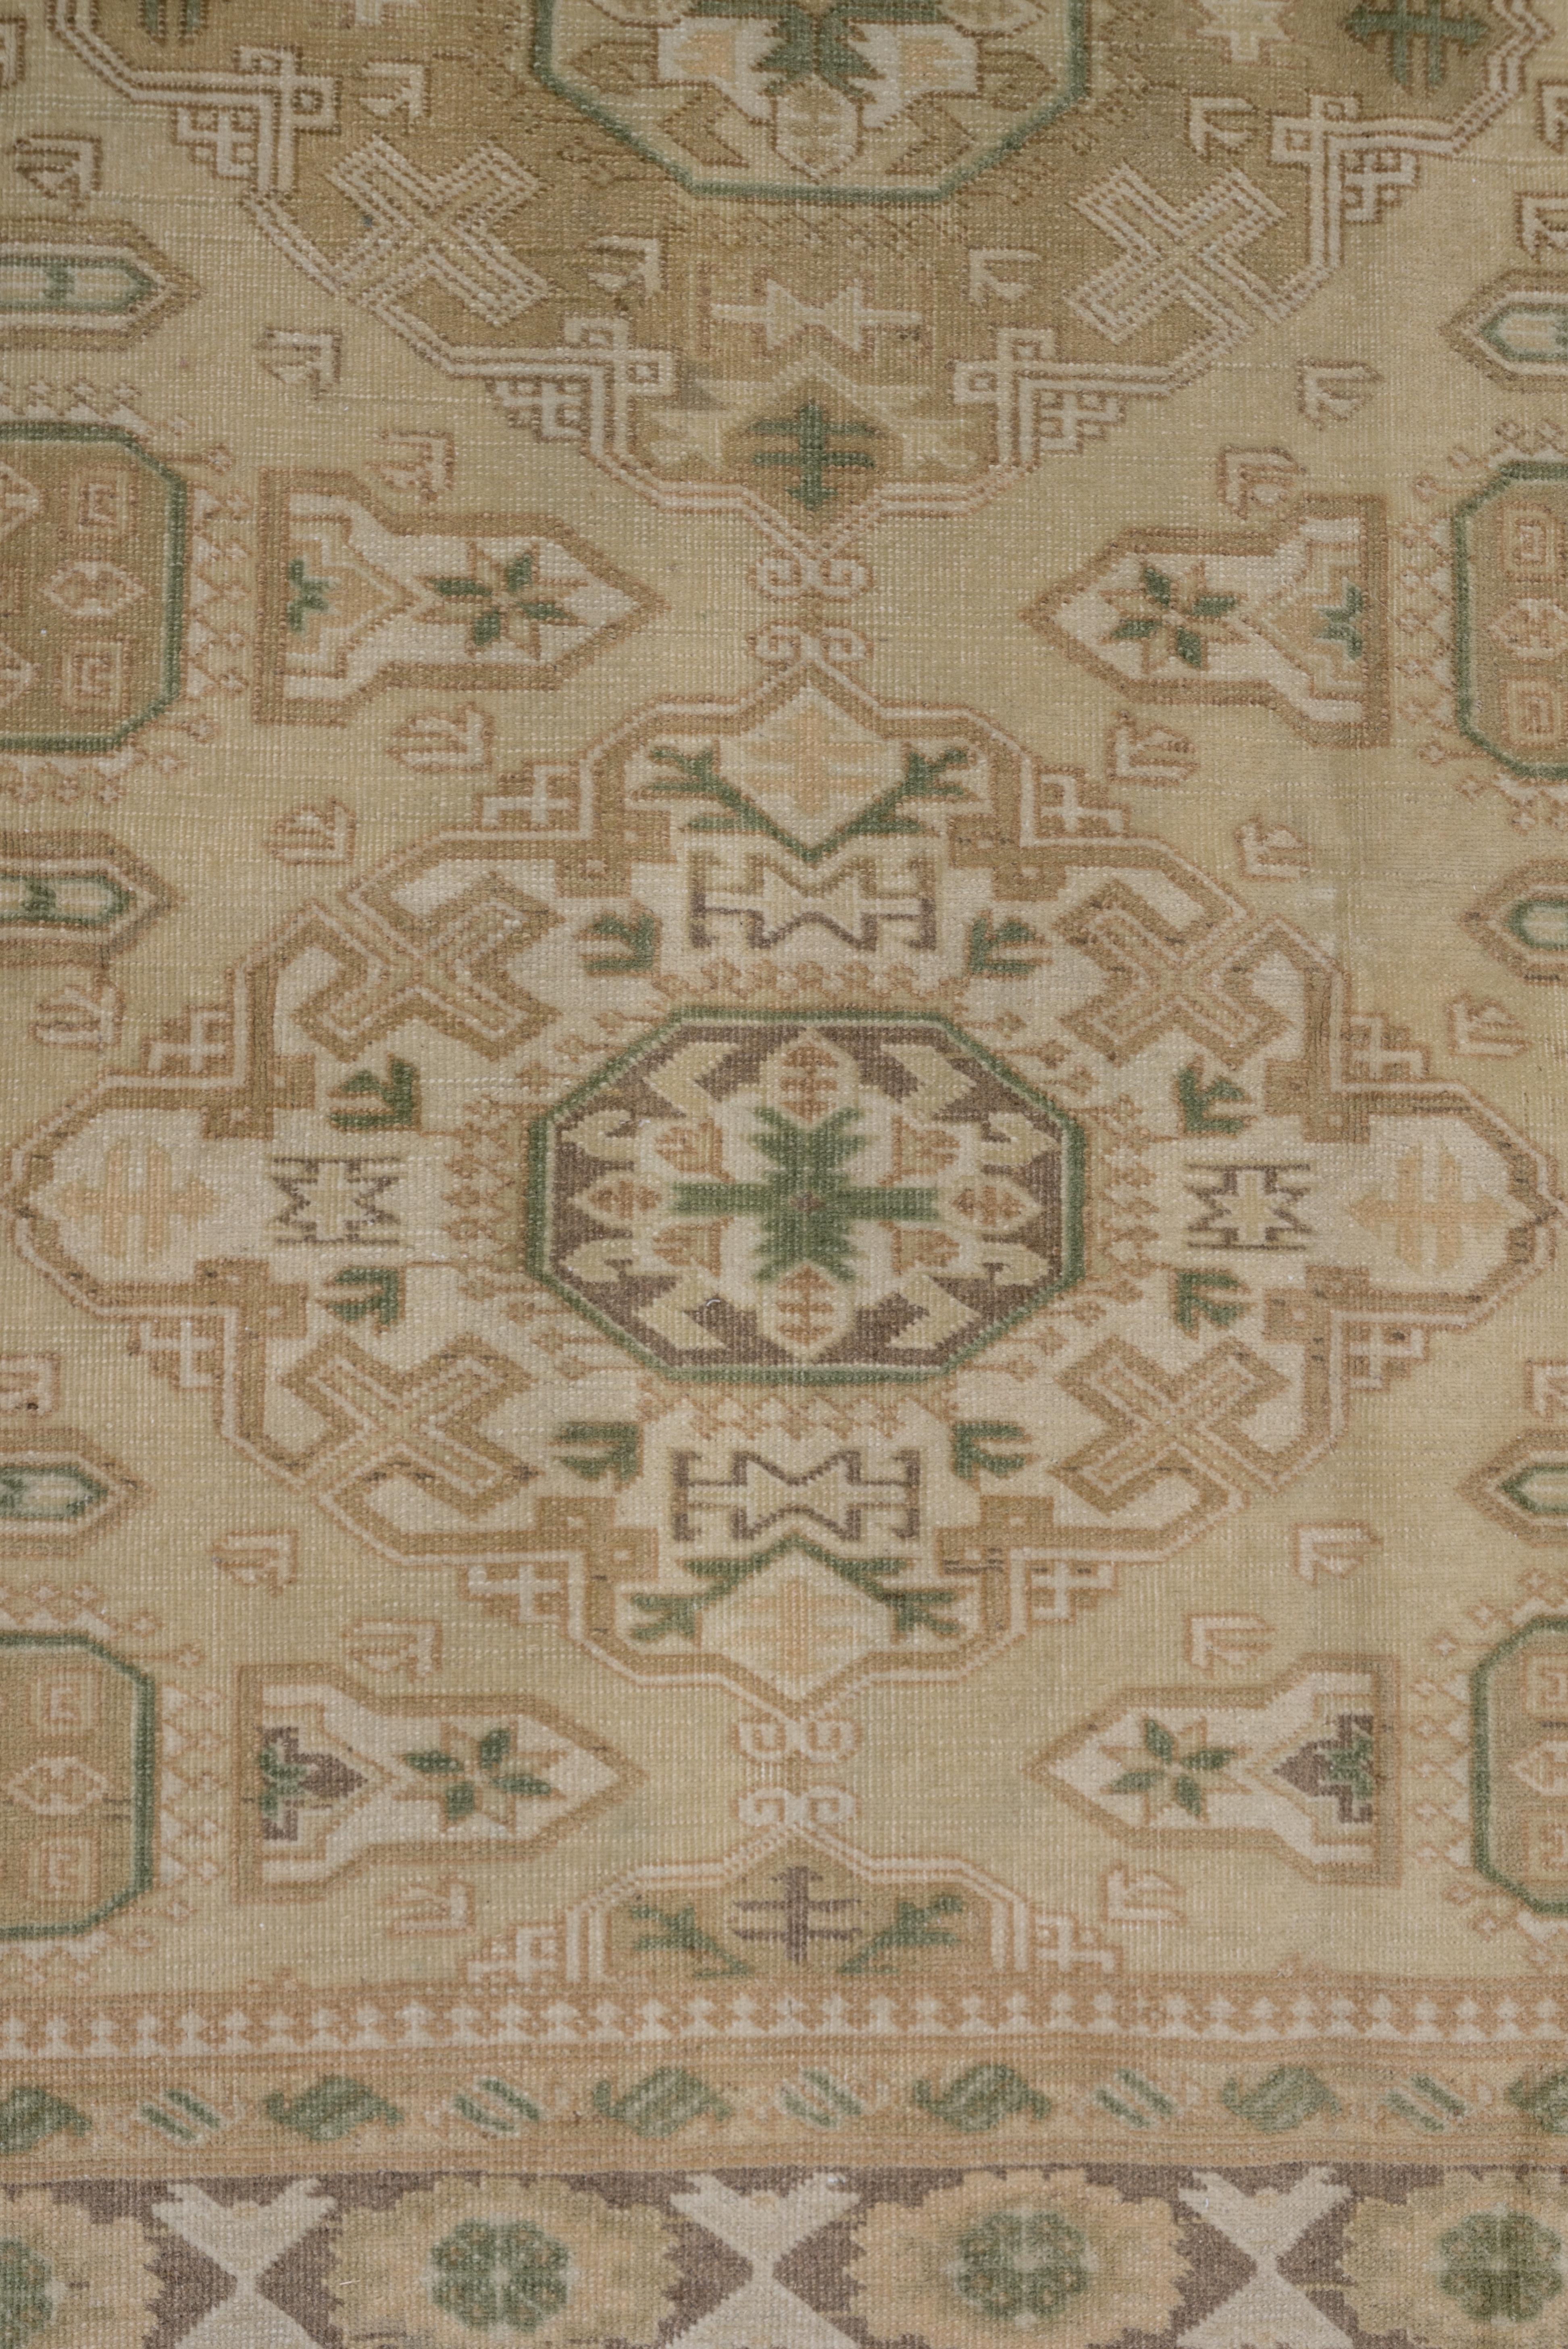 A close copy of a Caucasian sumak rug, this Turkish Oushakscatter shows three reticulated lozenge medallions in cream and buff on a camel-straw field. Supporting side octagons and 